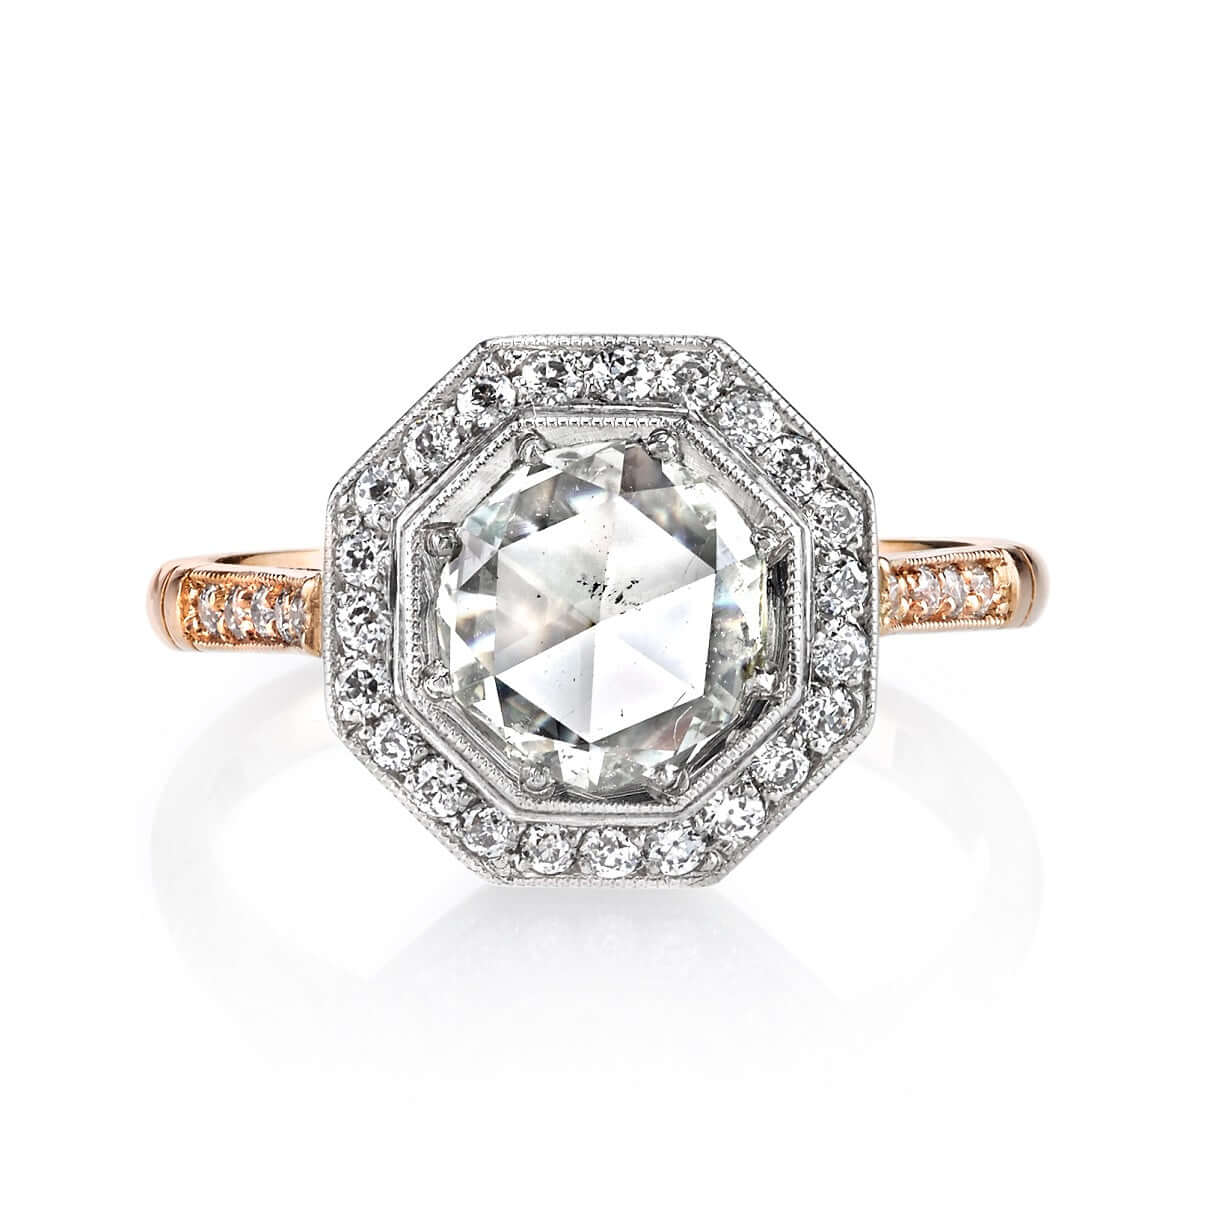 SINGLE STONE SAVANNAH RING featuring 0.92ct Light Yellow/SI2 rose cut diamond with 0.31ctw old European cut accent diamonds set in a handcrafted 18K rose gold and platinum mounting.